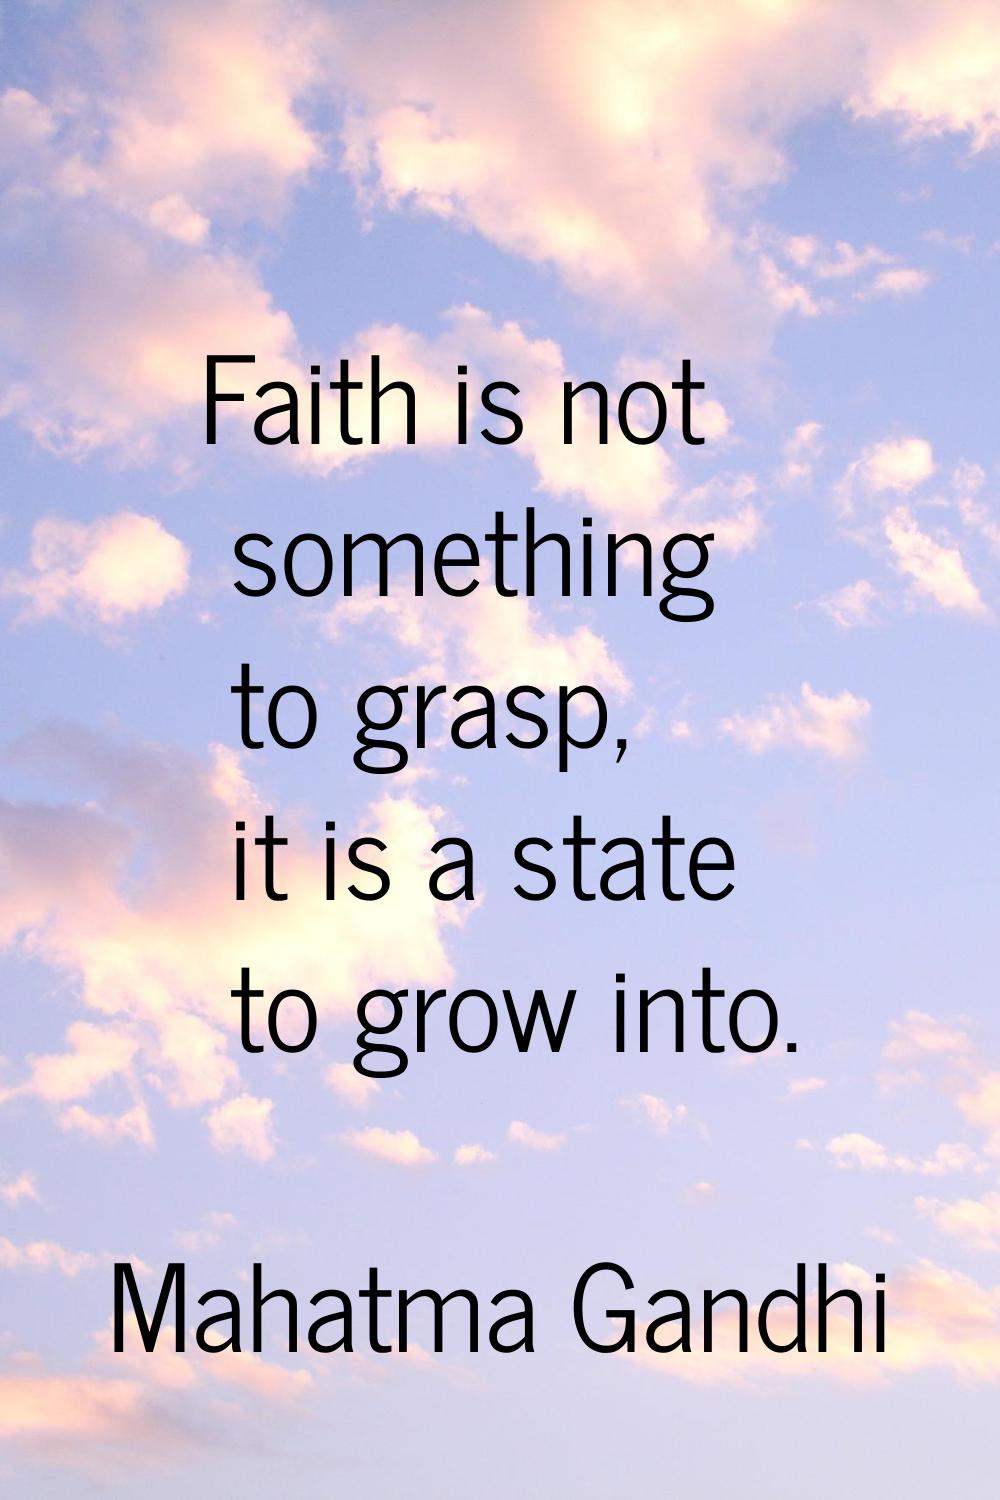 Faith is not something to grasp, it is a state to grow into.